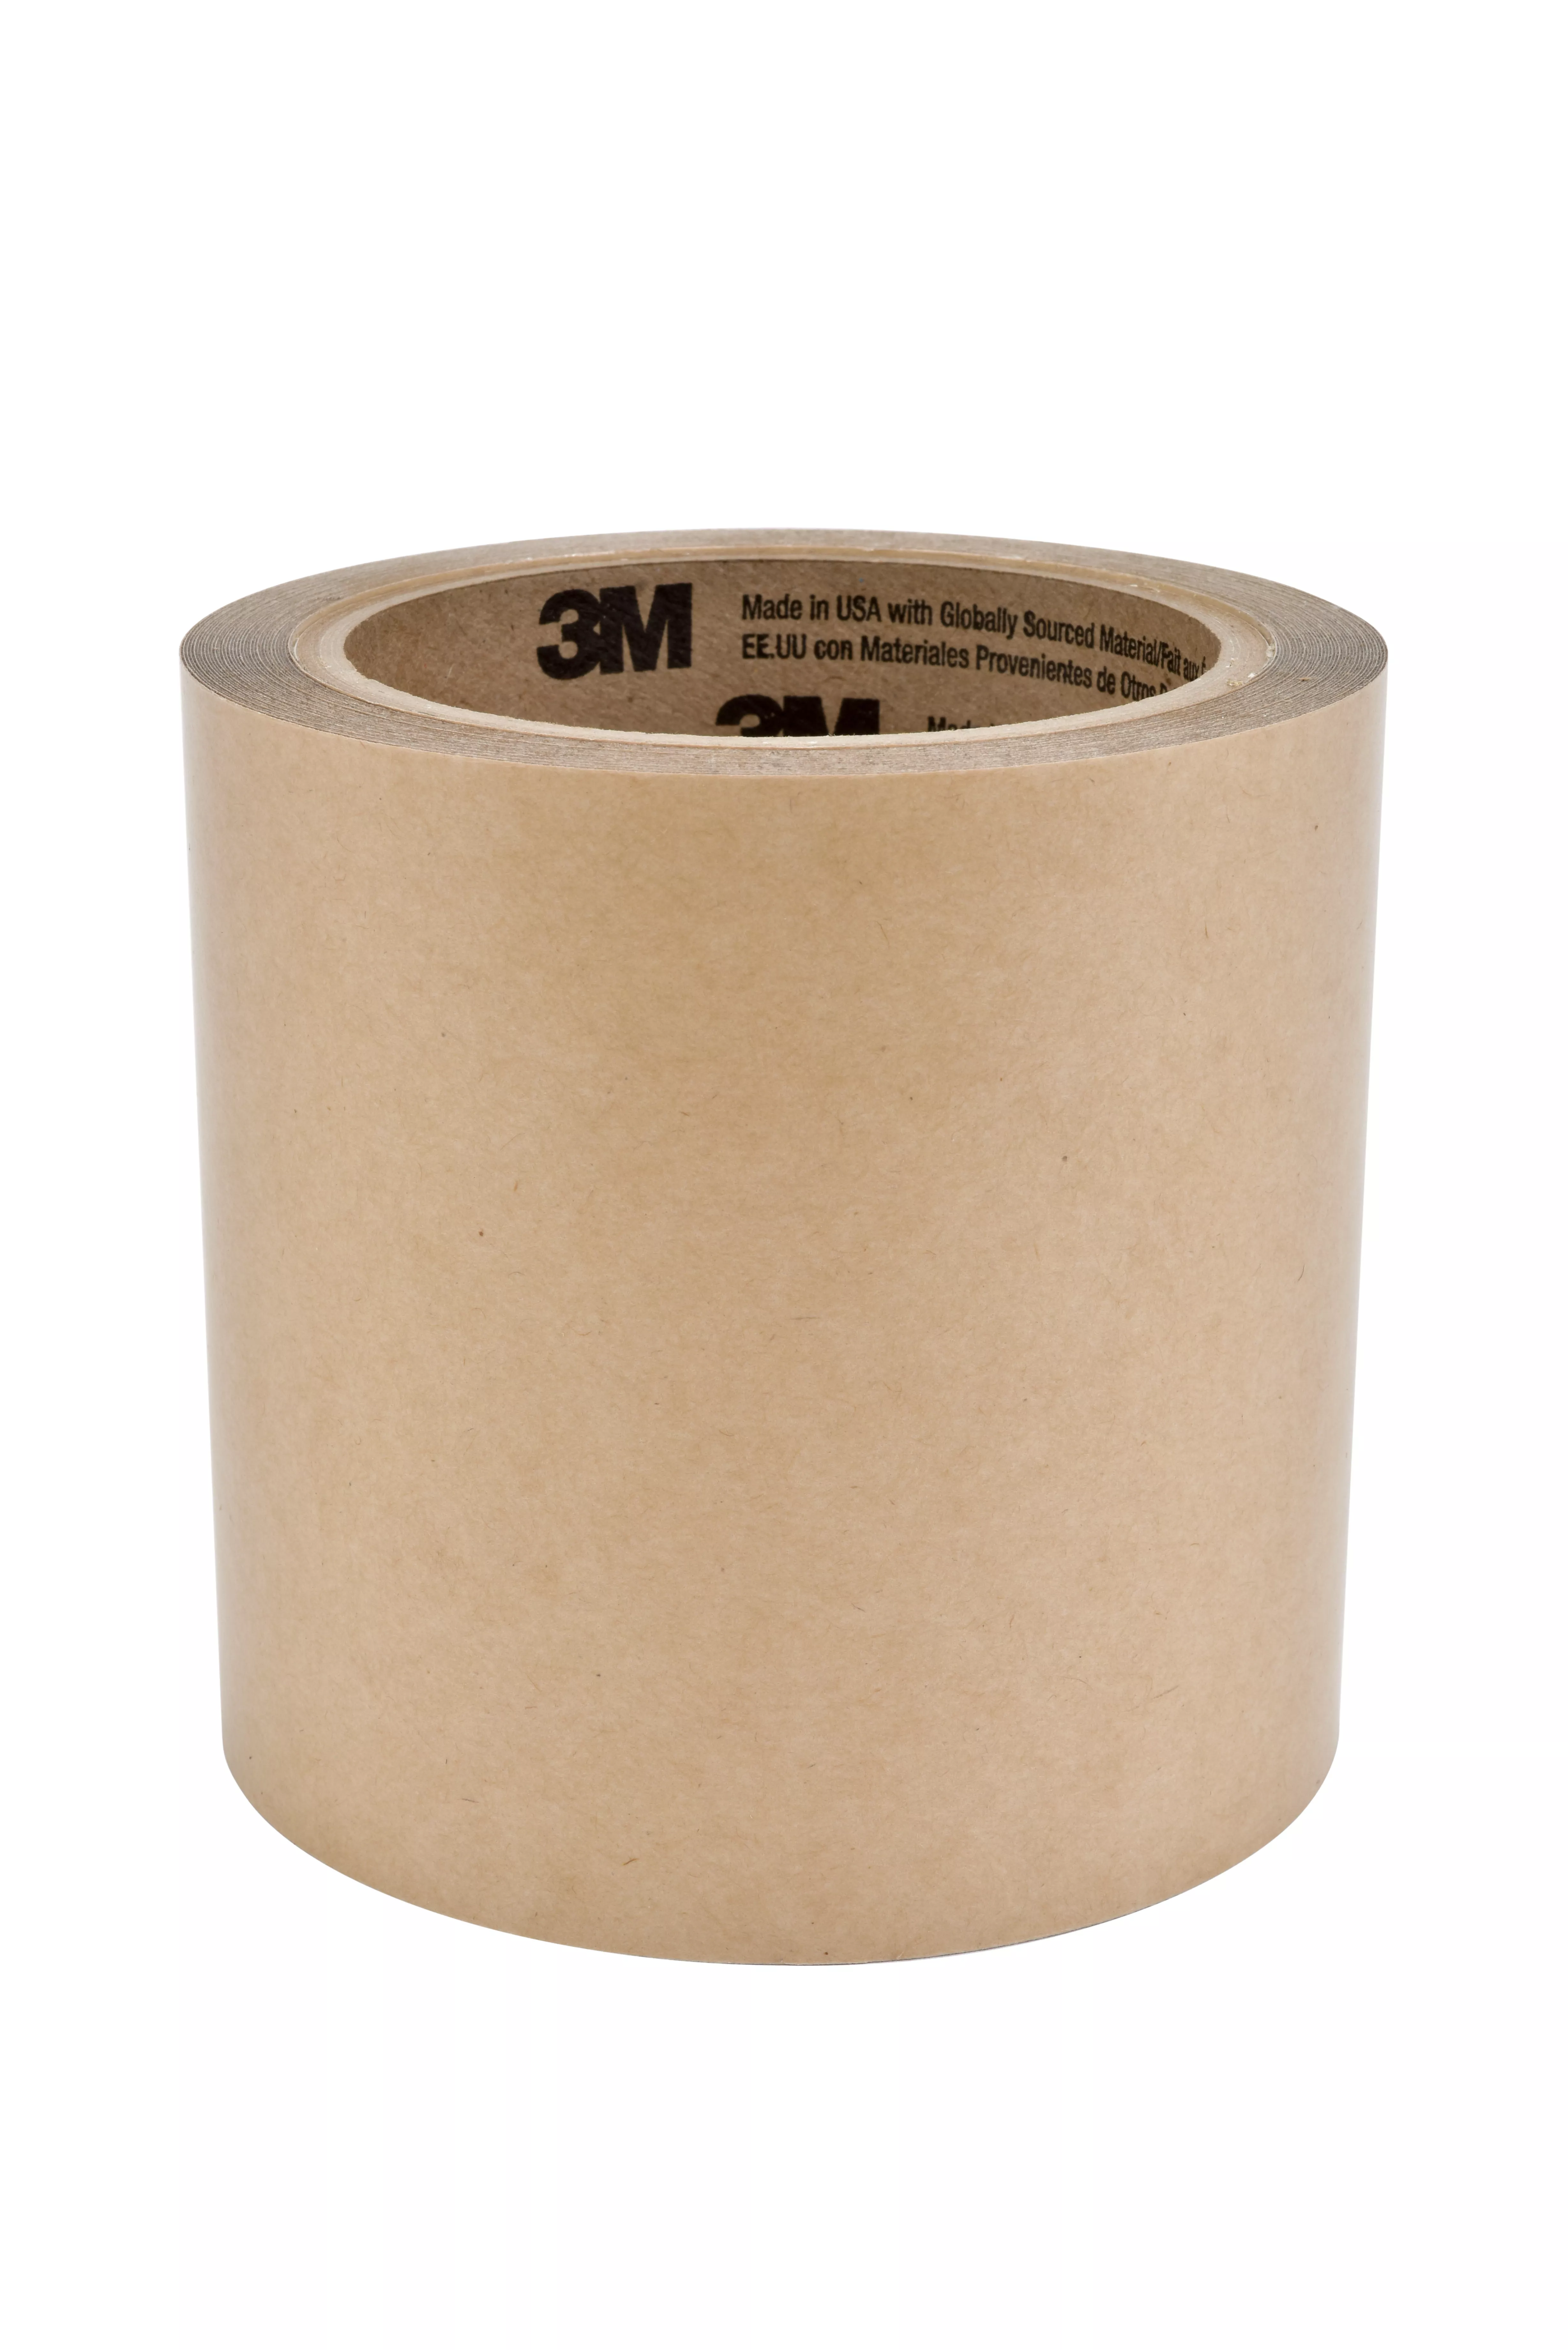 3M™ Adhesive Transfer Tape L3+T3, Clear, 54 in x 250 yd, 3 mil, 1
Roll/Case